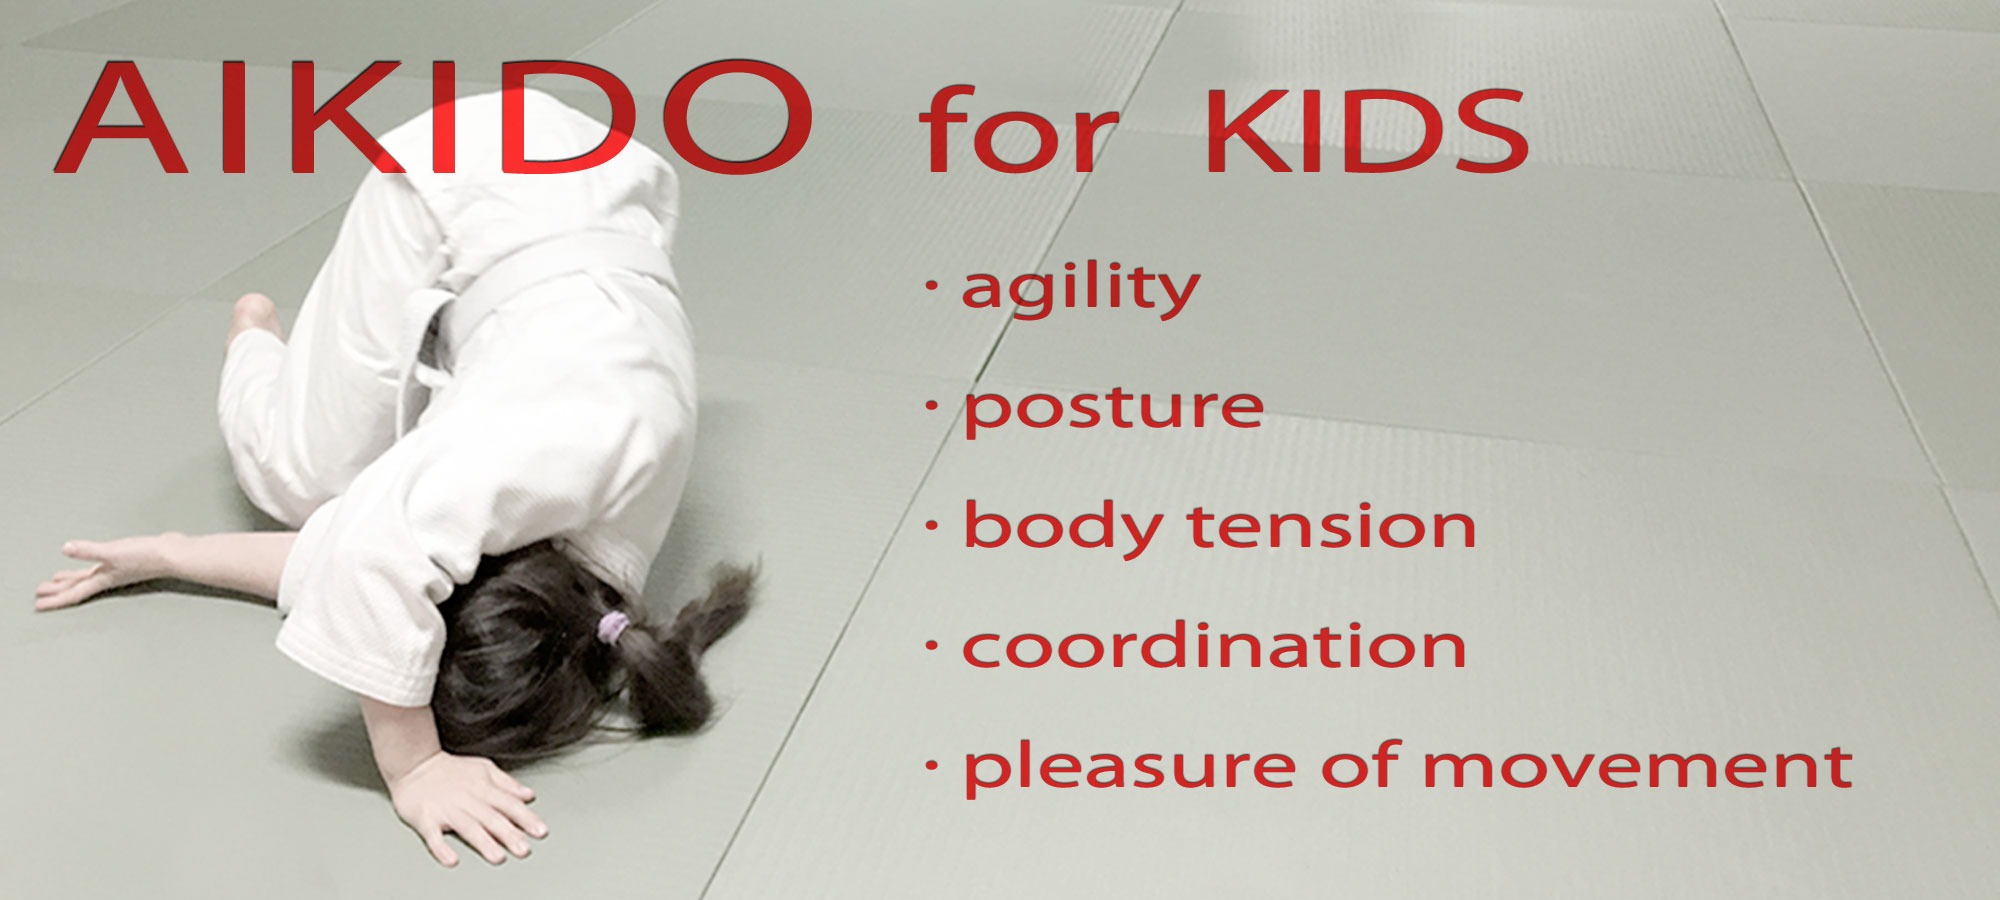 Aikido for kids